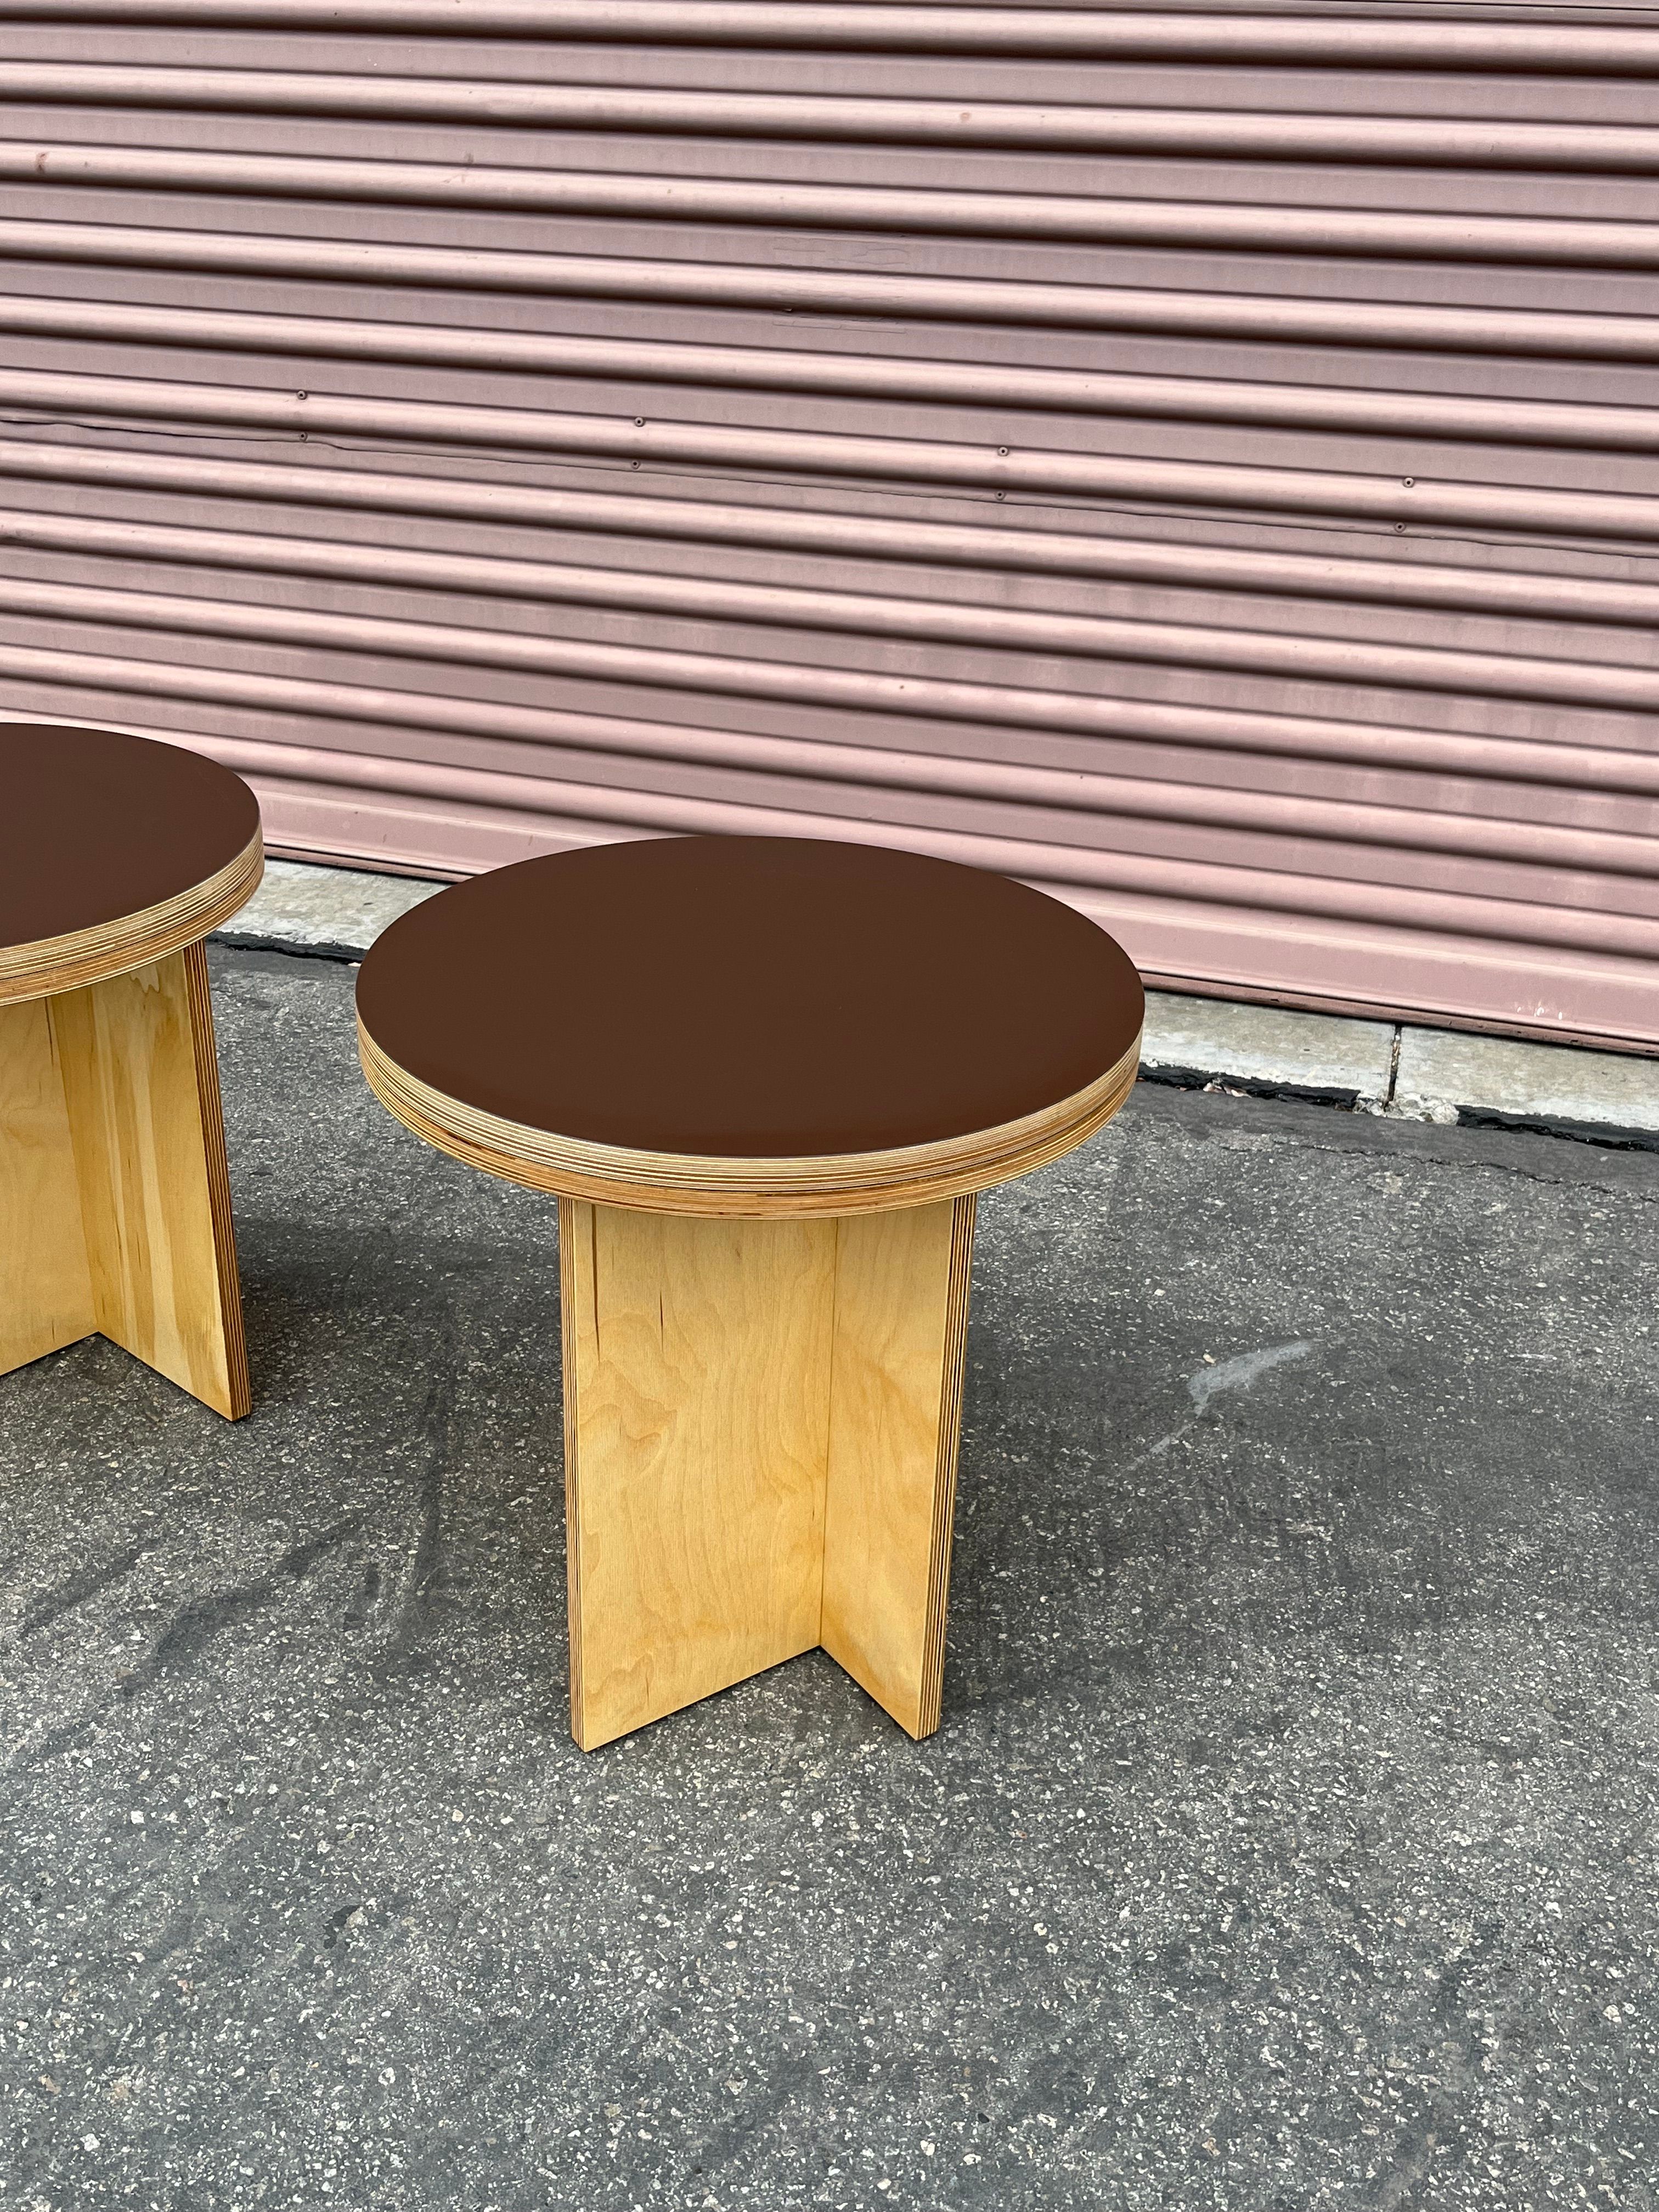  Round Offset Stools - Brown product image 4